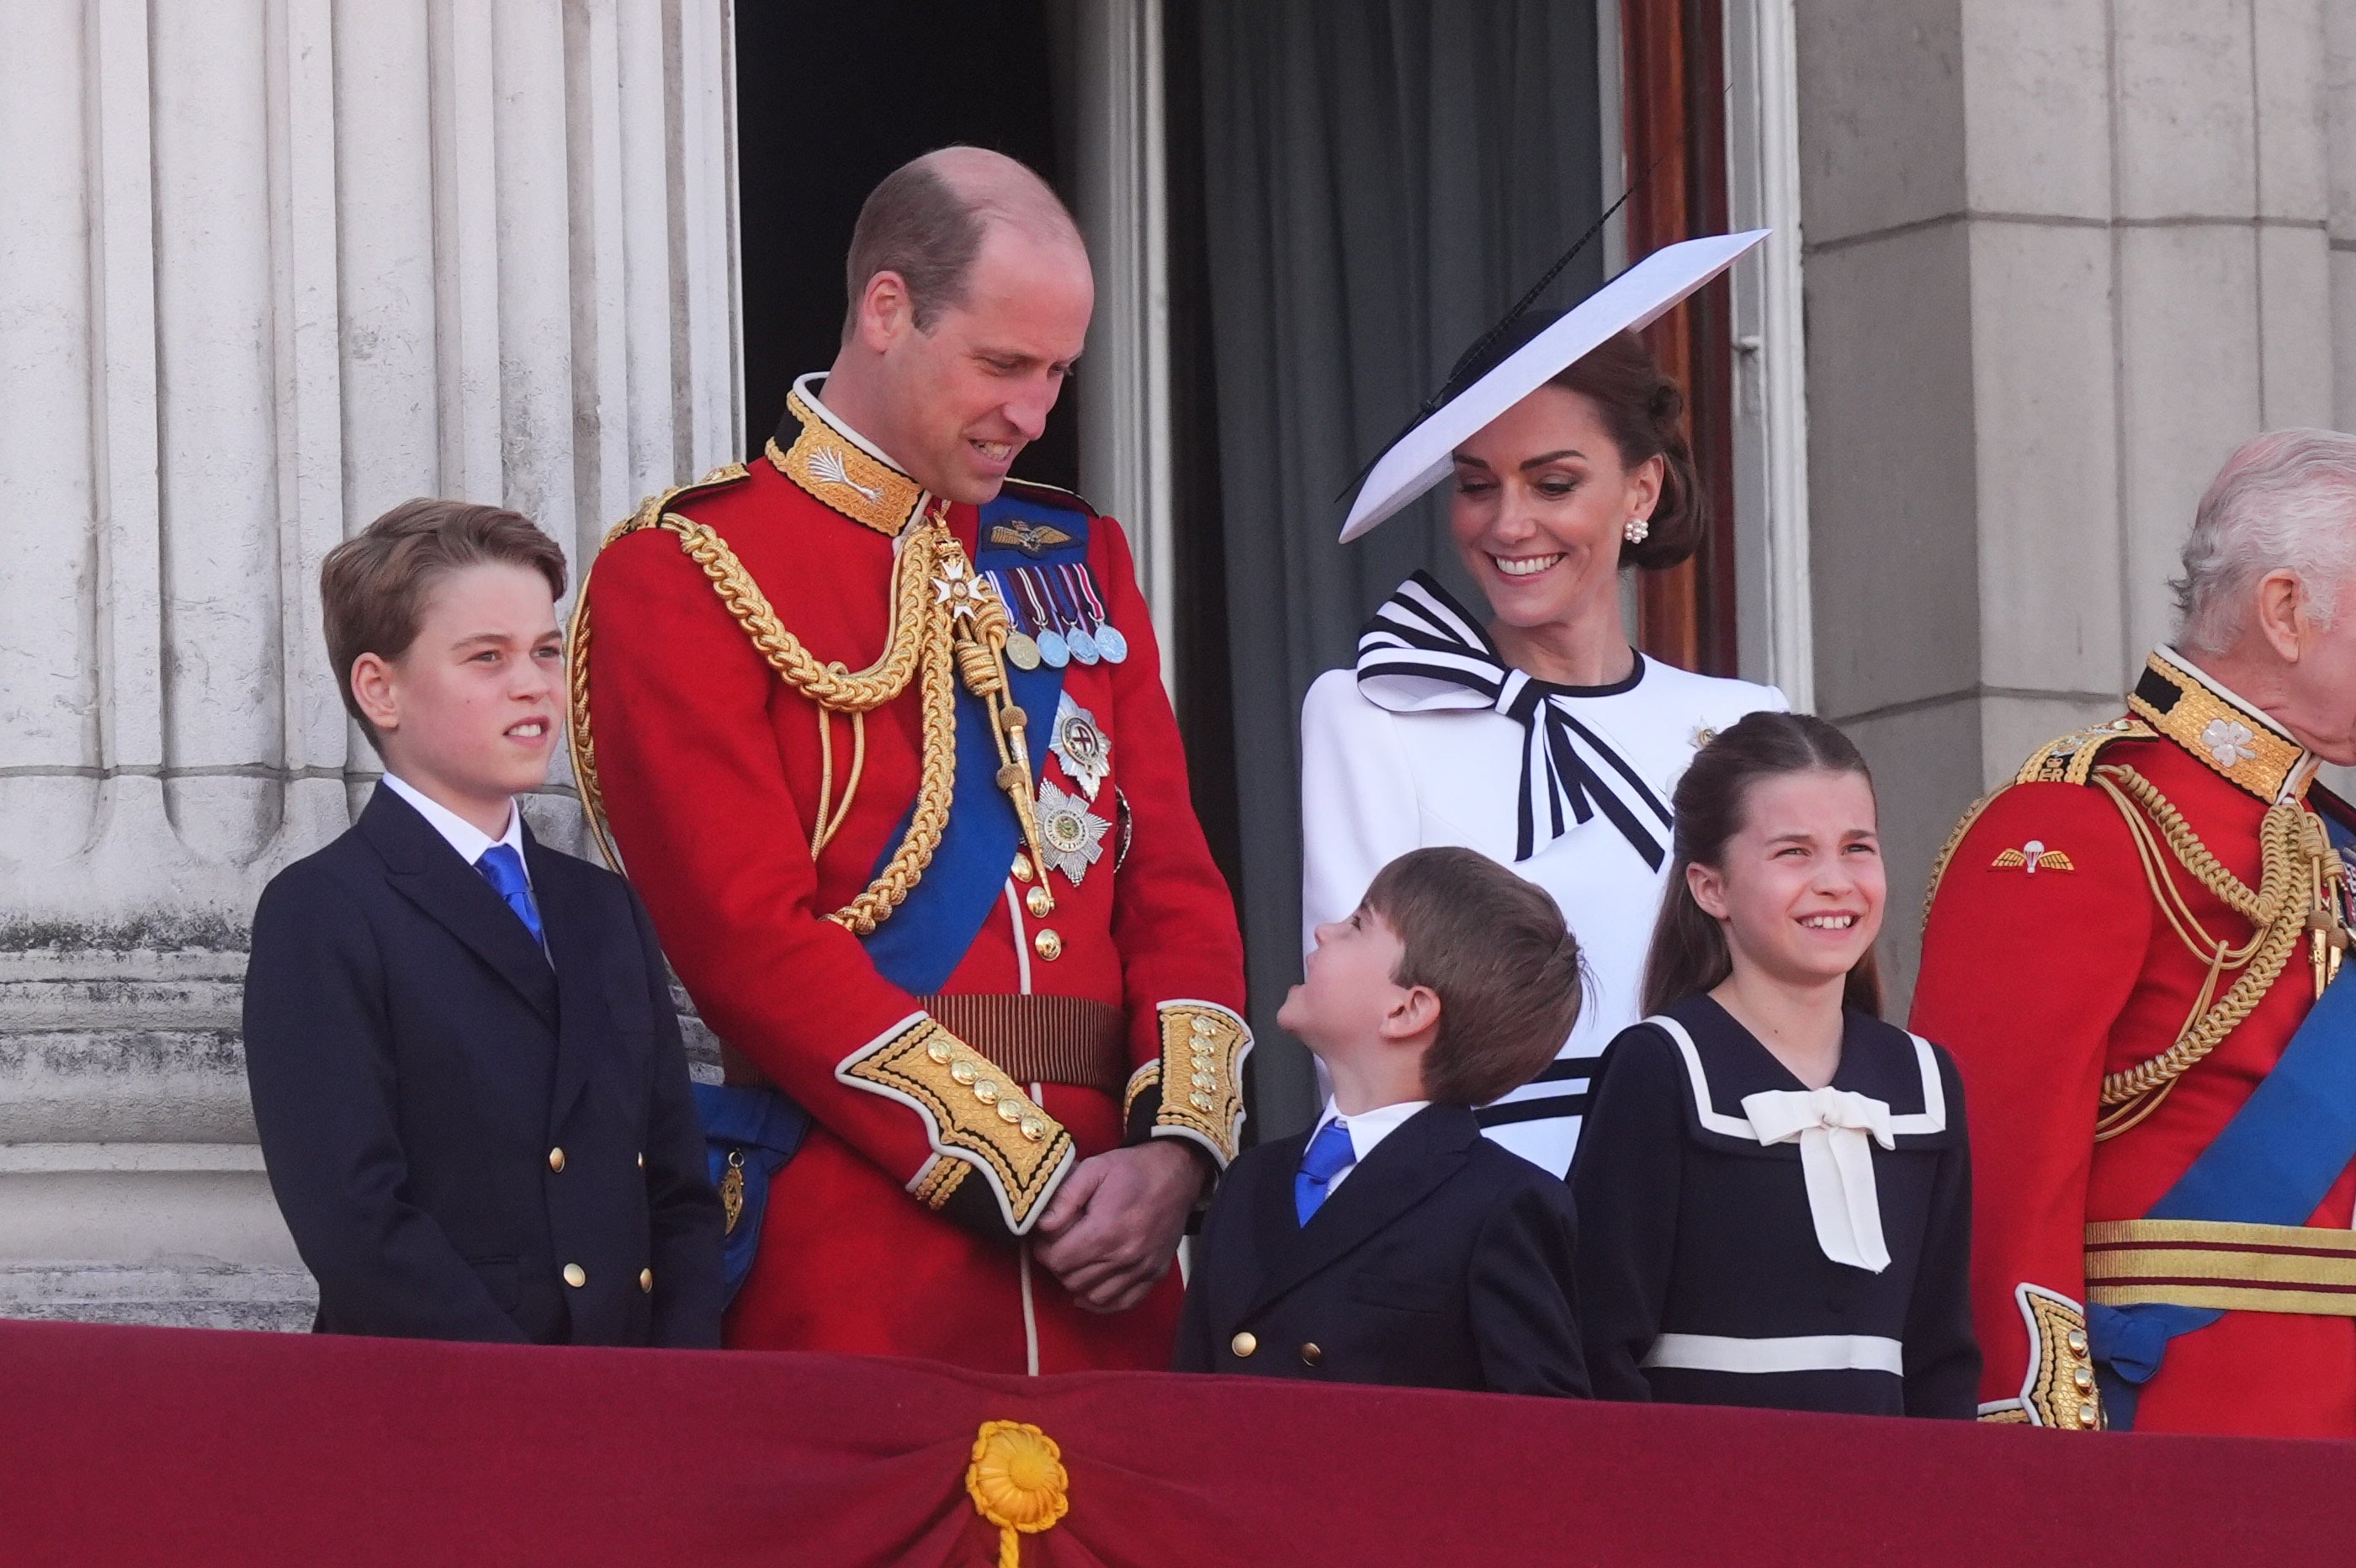 Louis looks to his father as the royals took to the balcony at Buckingham Palace